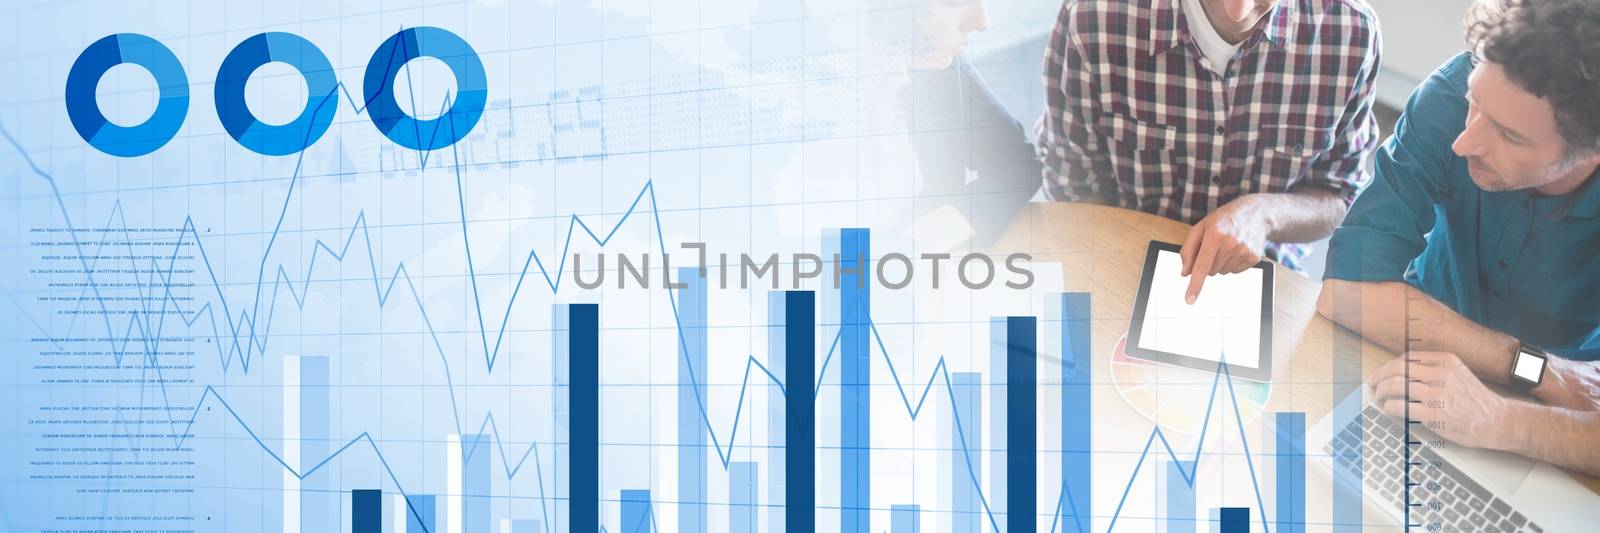 Digital composite of Business people having a meeting with bar charts and statistics transition effect